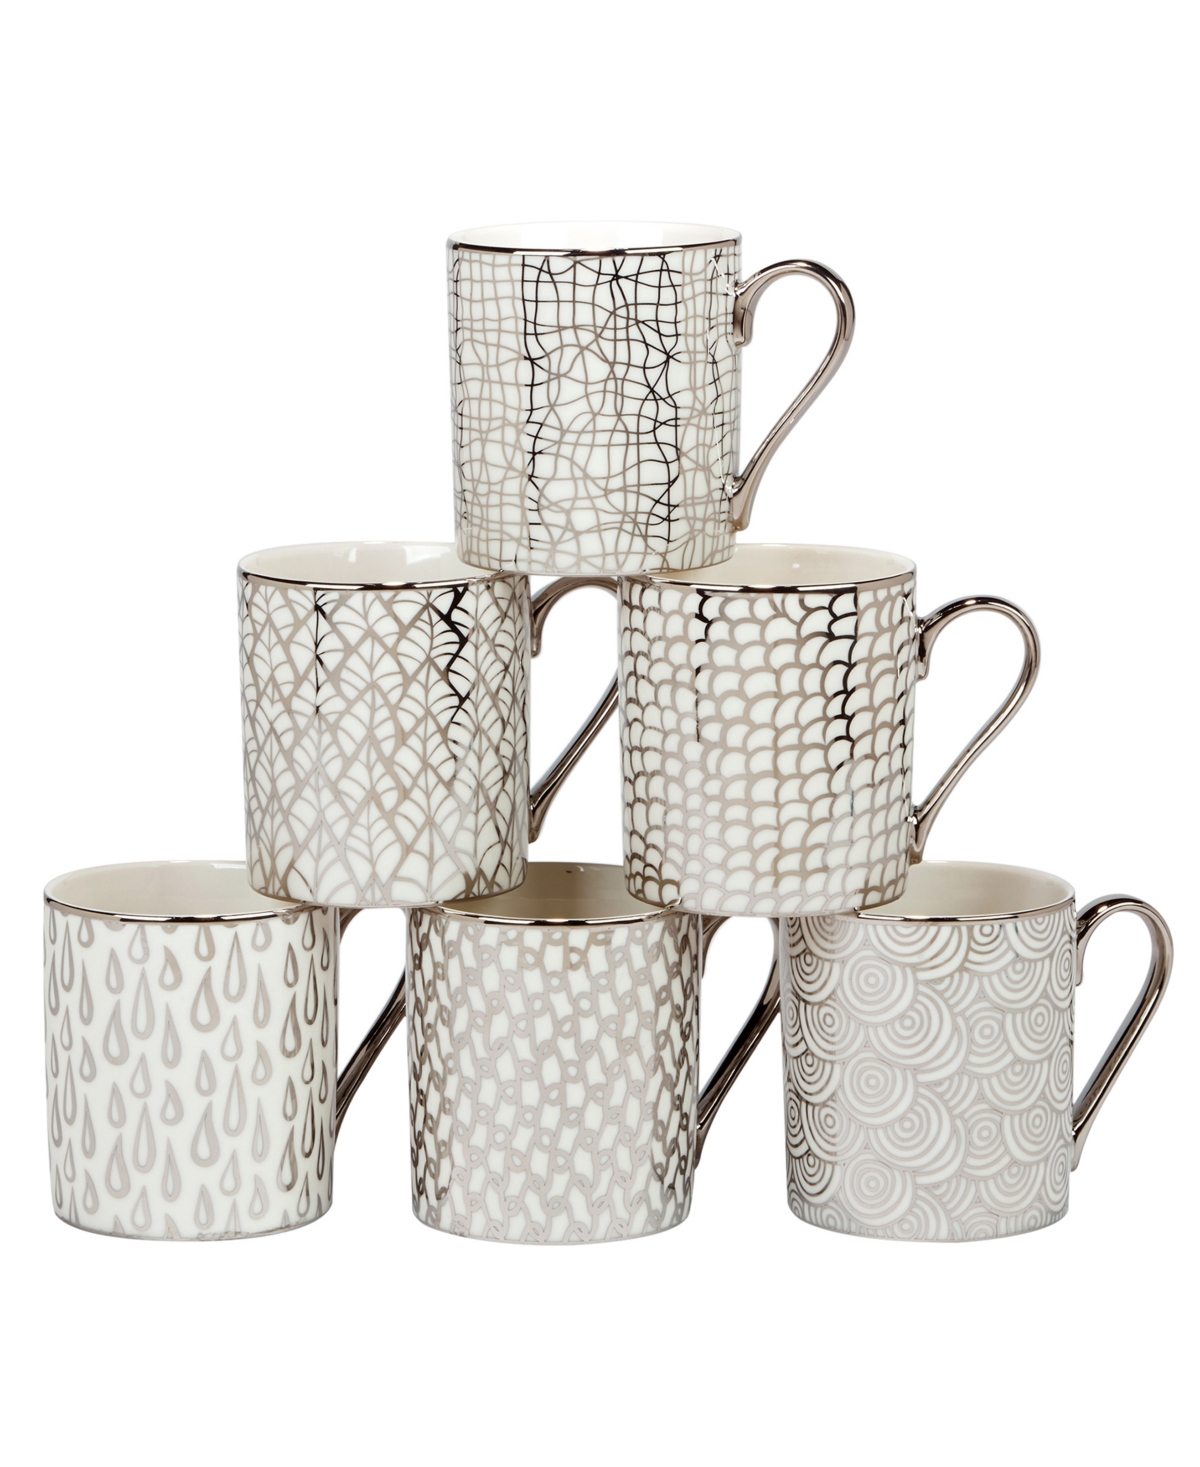 Mosaic Silver-Tone Plated 16 oz Can Mugs Set of 6 - Silver